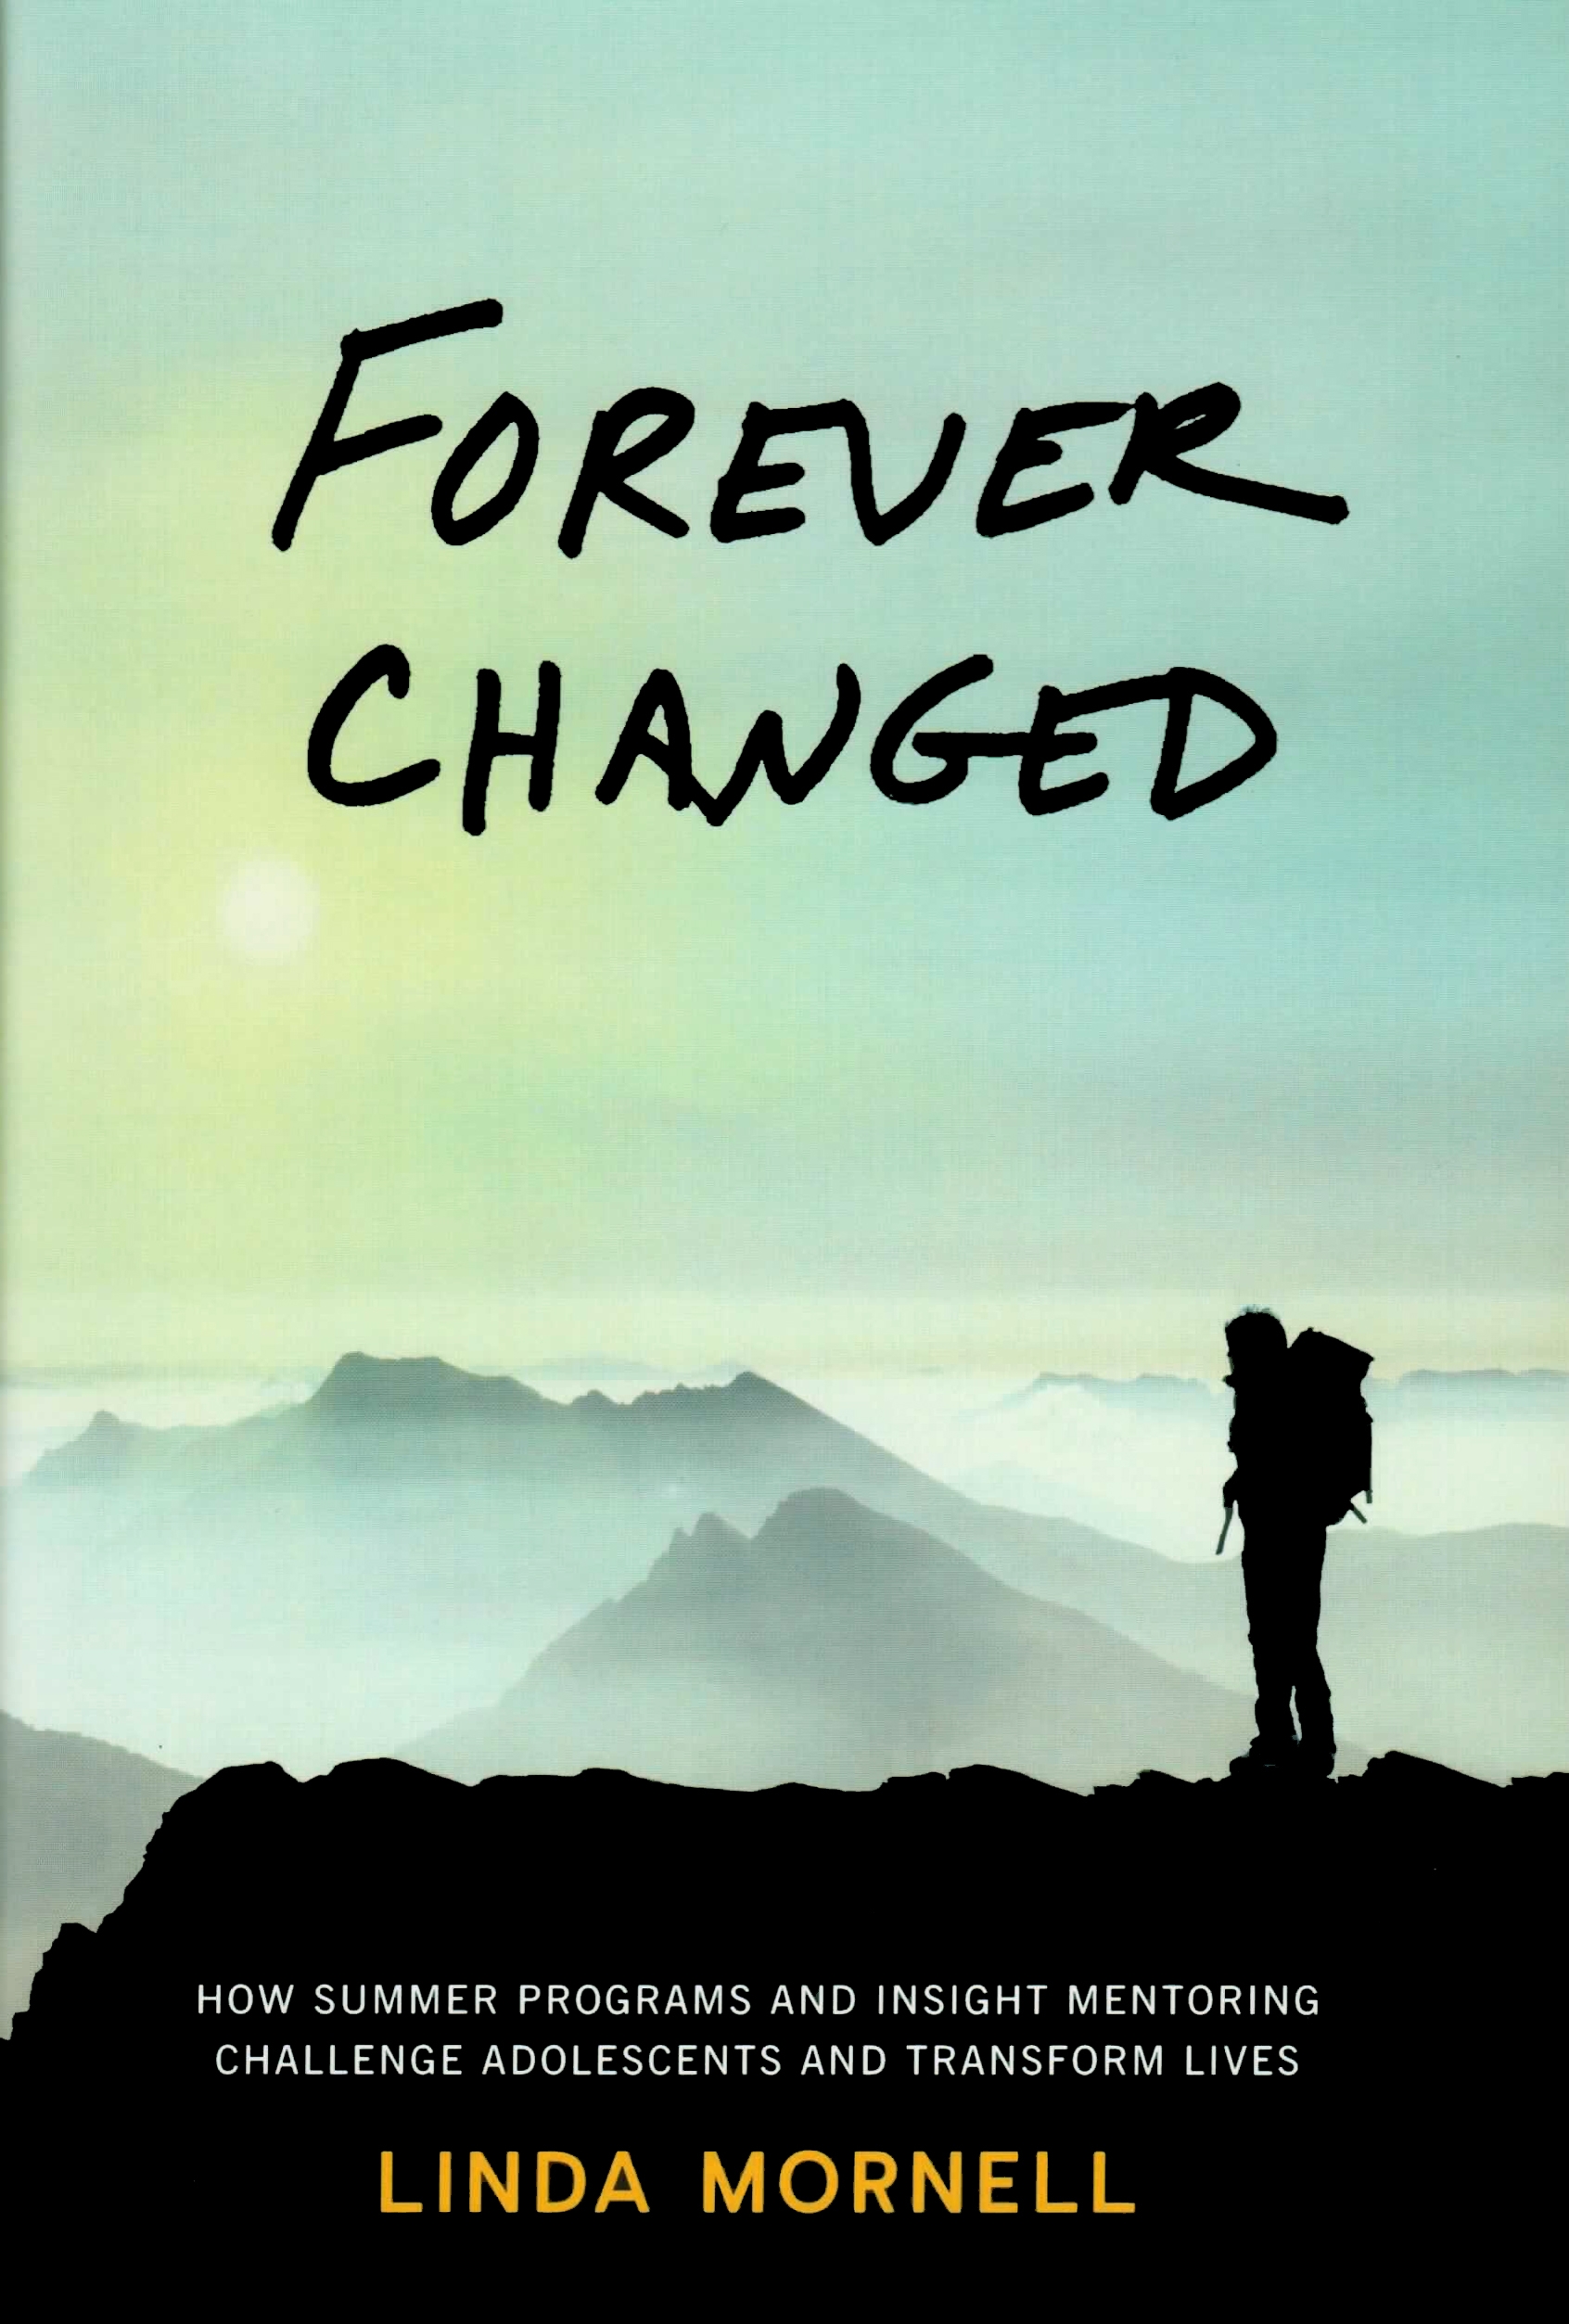 Forever Changed: How Summer Programs and Insight Mentoring Challenge Adolescents and Transform Lives by Linda Mornell